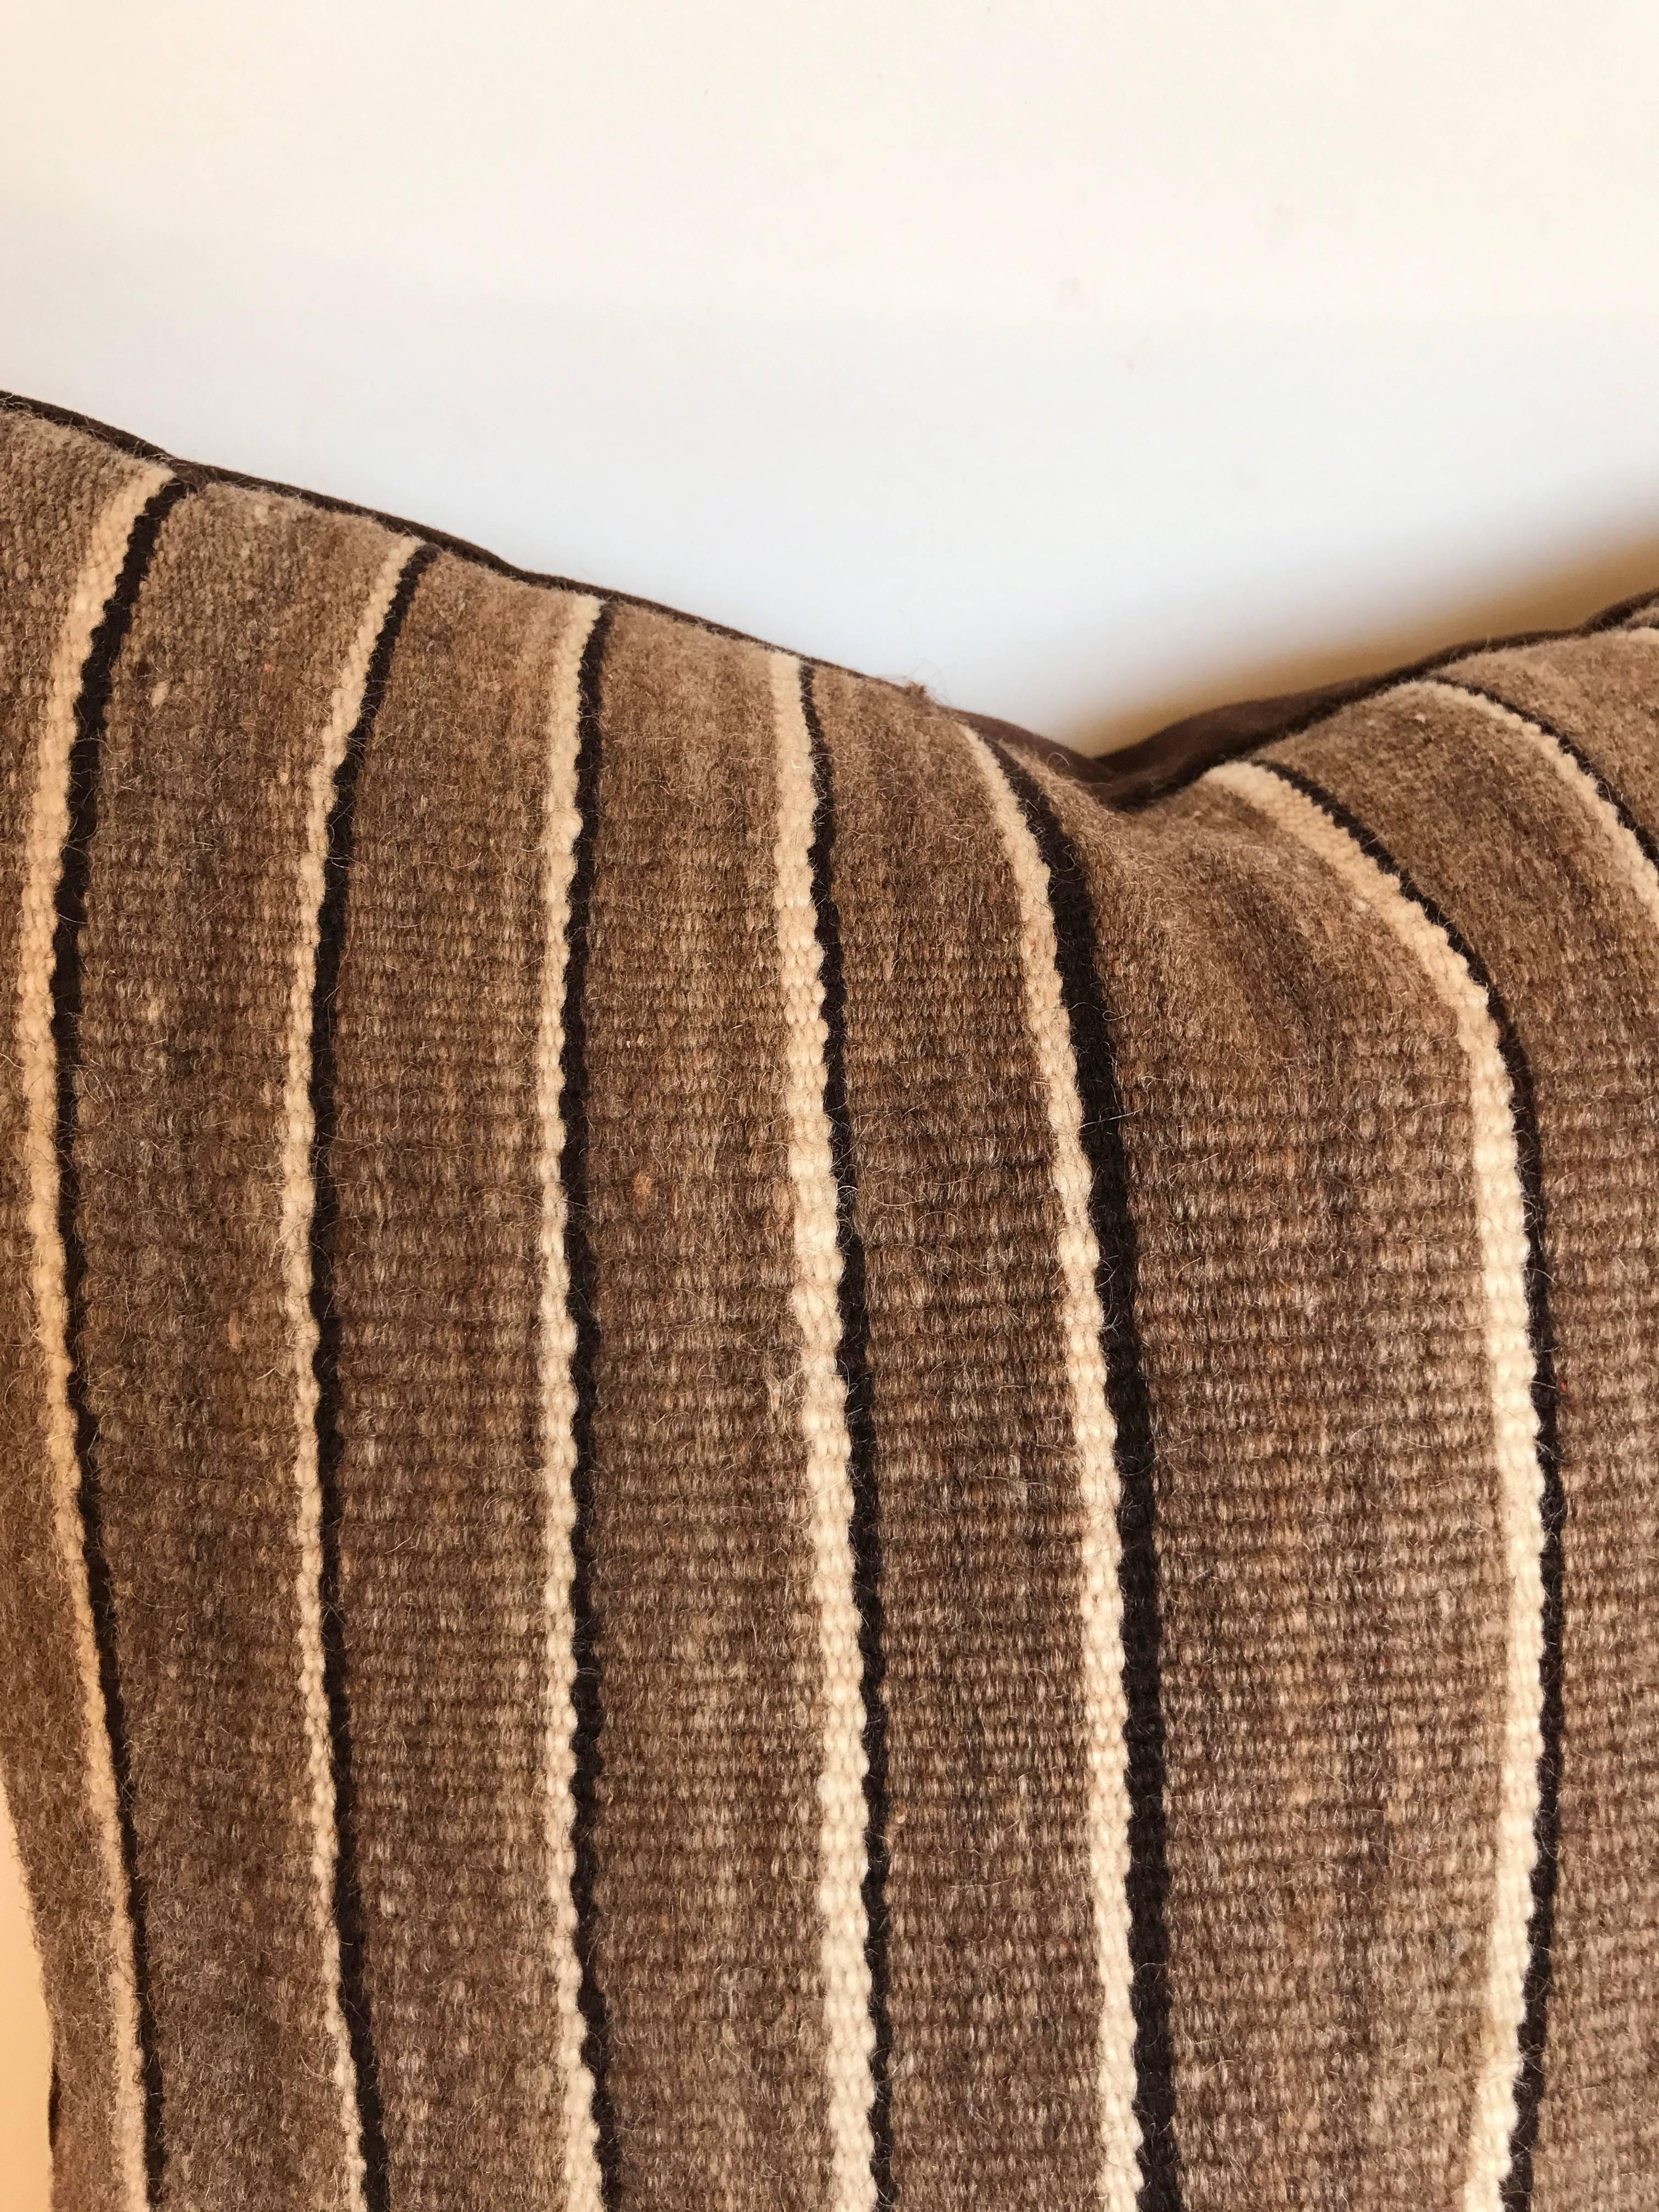 Custom pillow cut from a vintage hand-loomed wool Moroccan Berber rug from the Atlas Mountains. Wool is soft and lustrous with stripes in natural shades of brown, gray and cream. Pillow is backed in a dark brown velvet, filled with an insert of